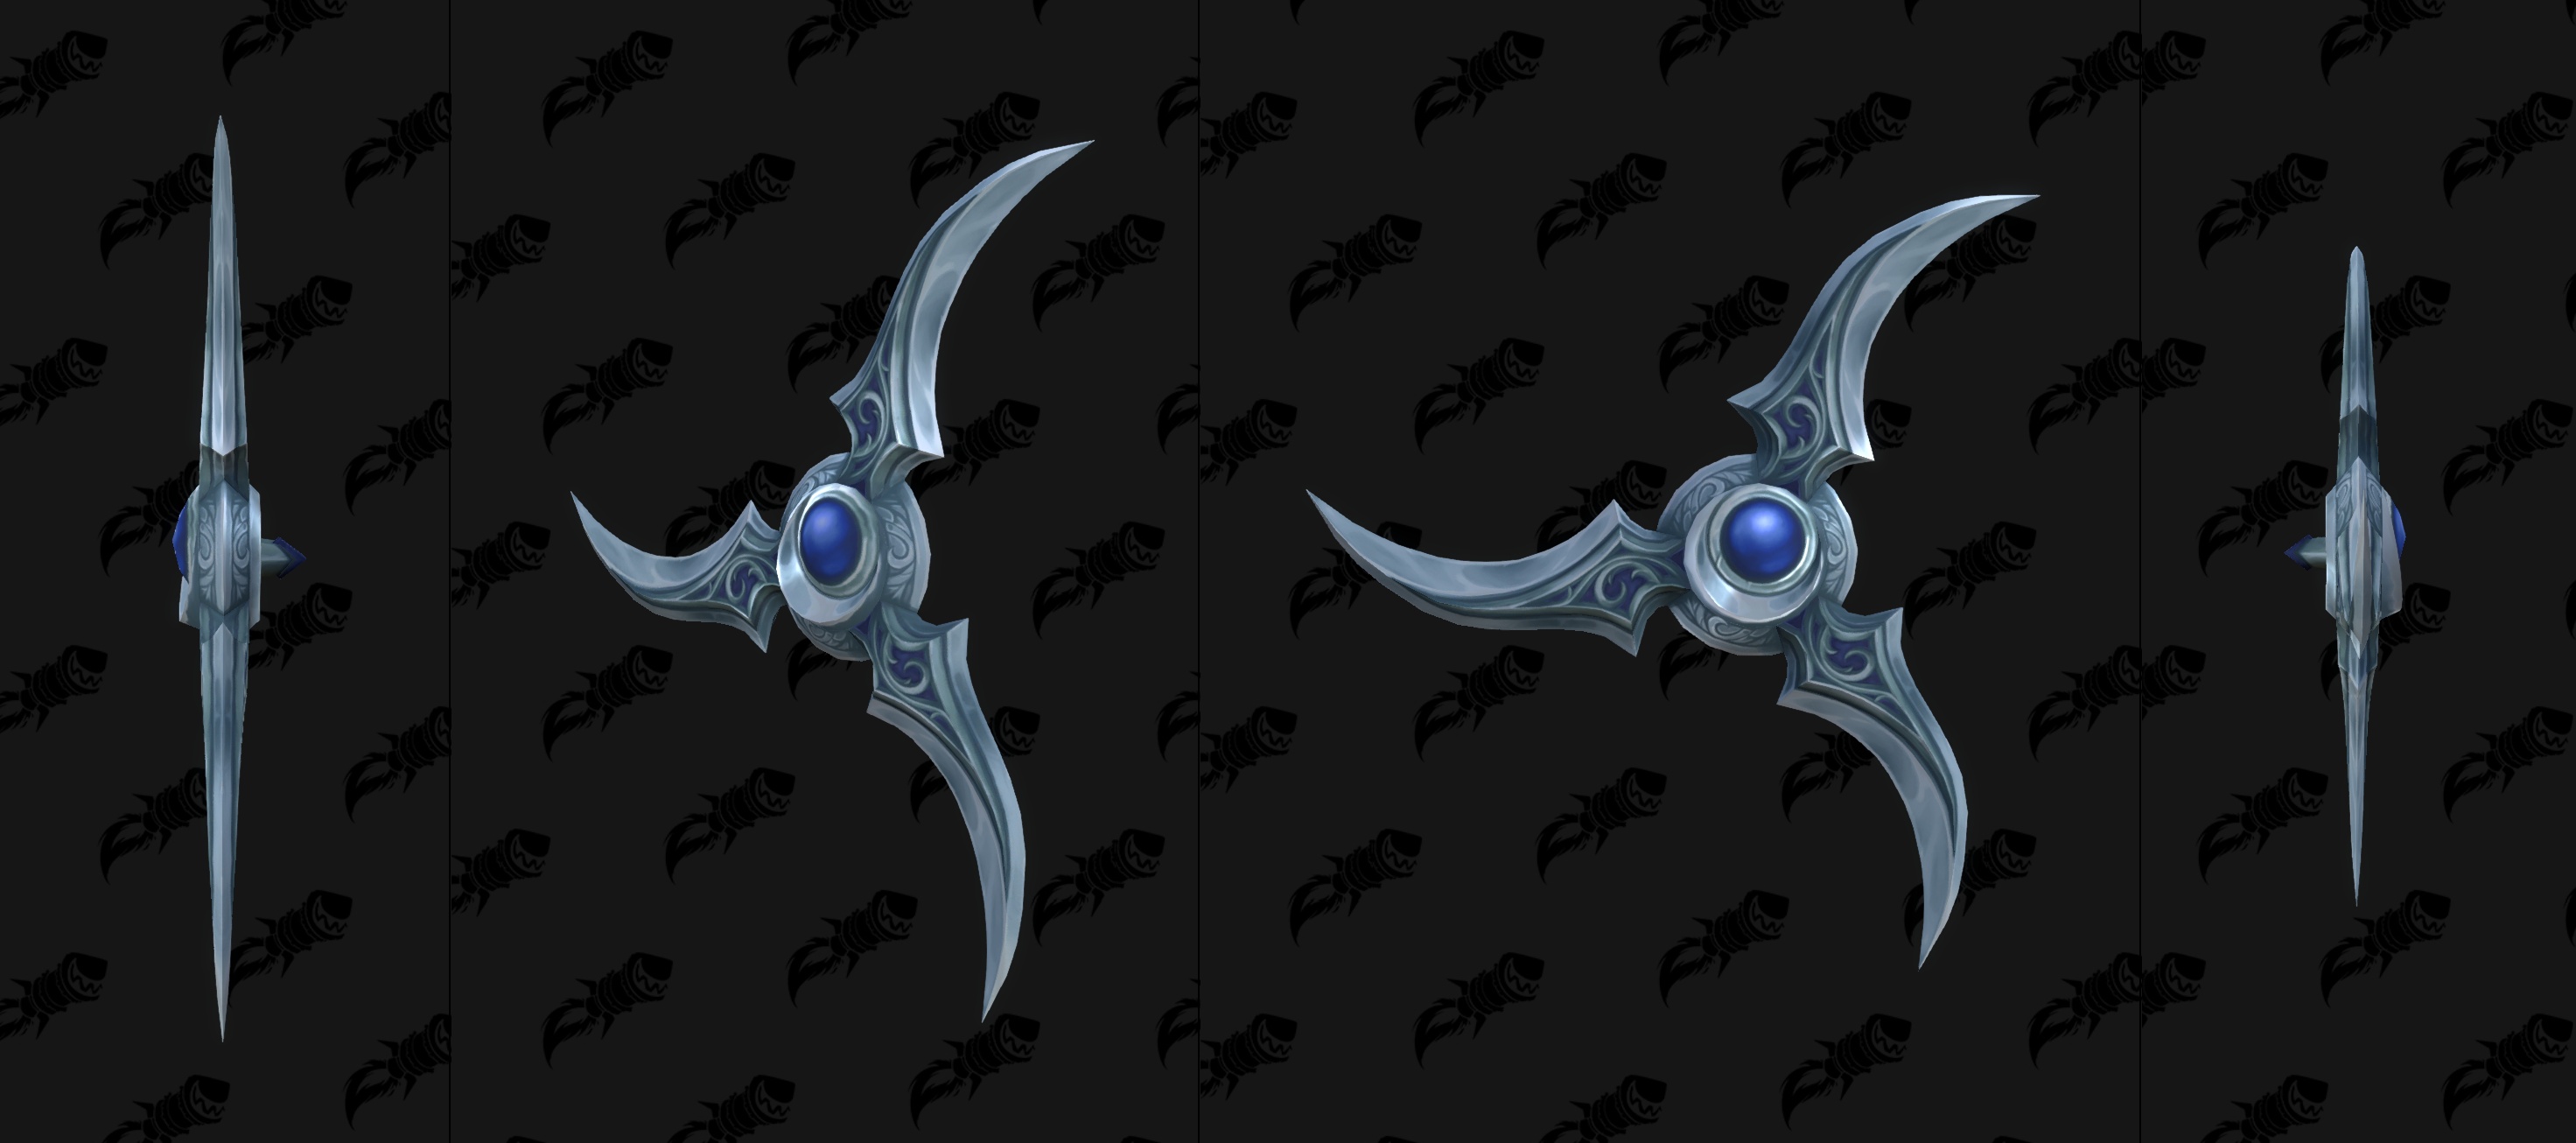 Night Elf Weapon Models to Match Heritage Armor - The War Within